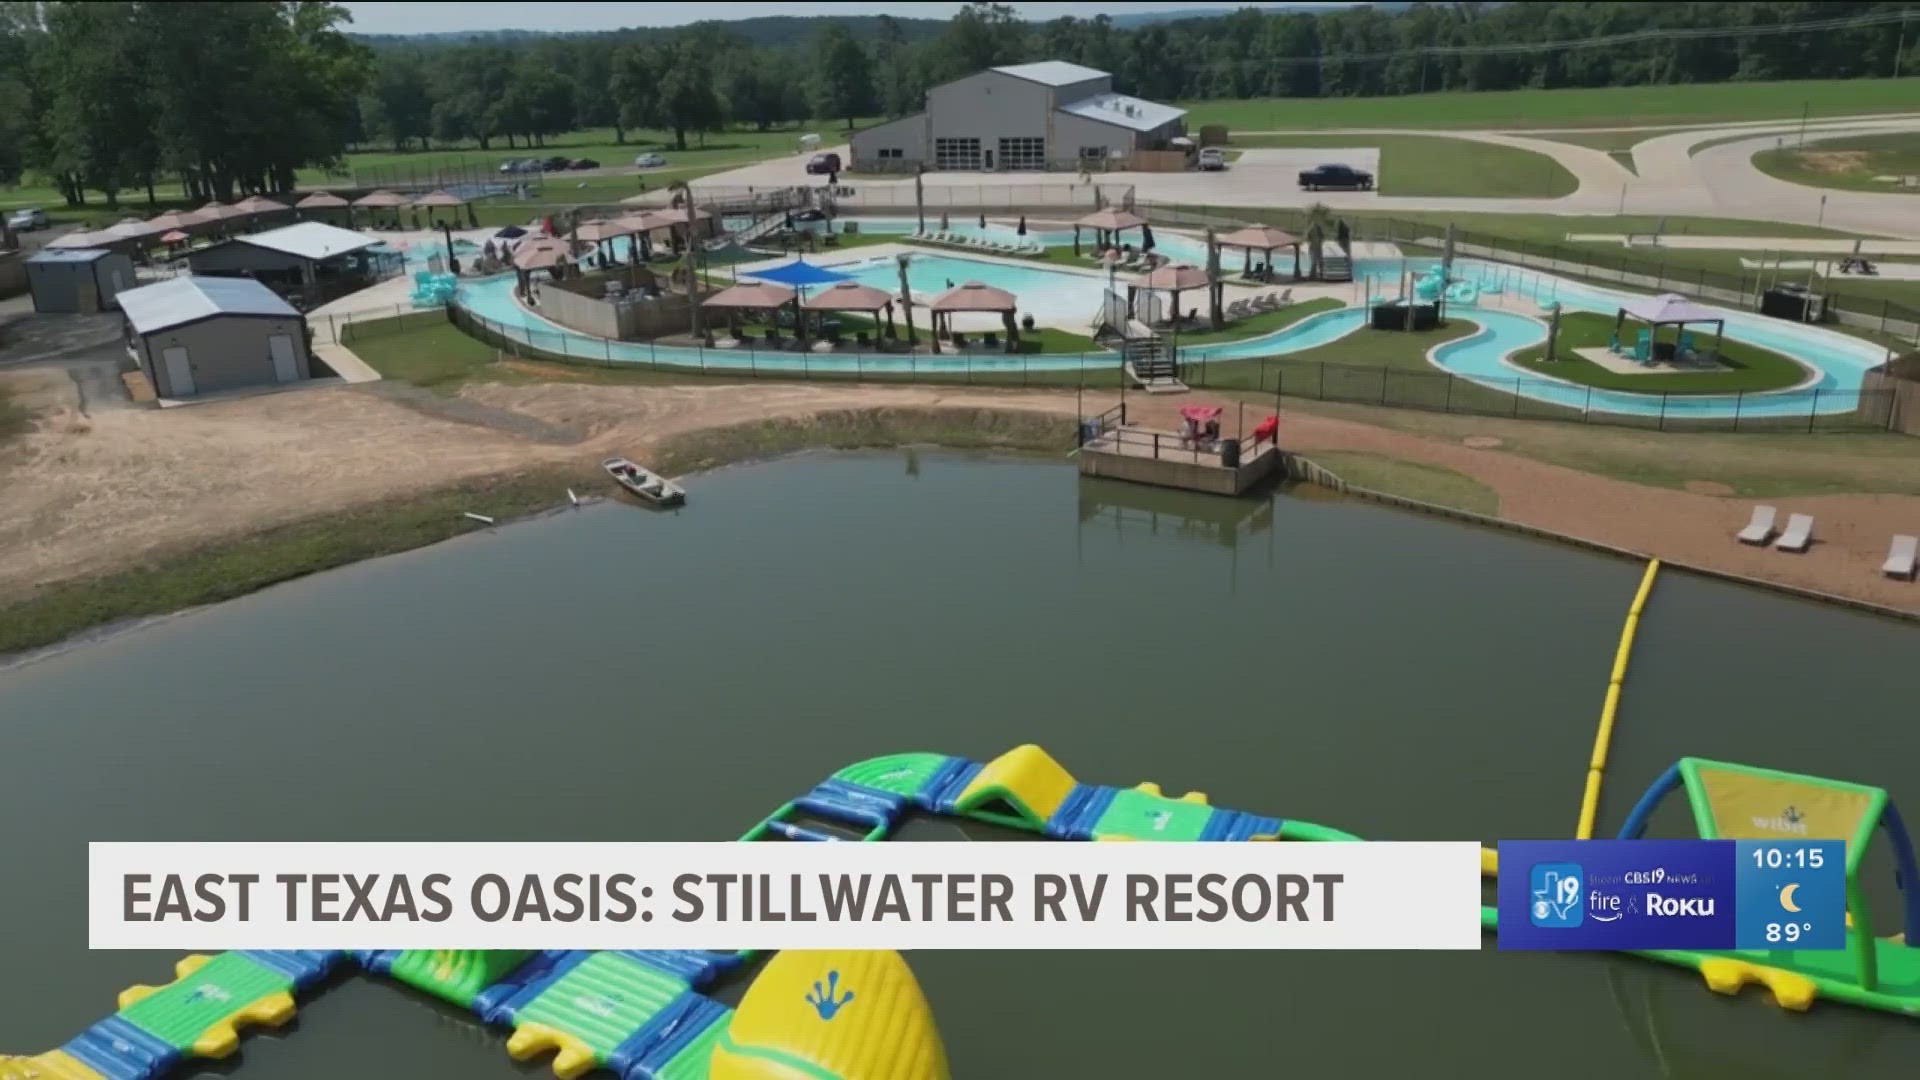 East Texas Oasis: Stillwater RV Resort attracts families from across the nation